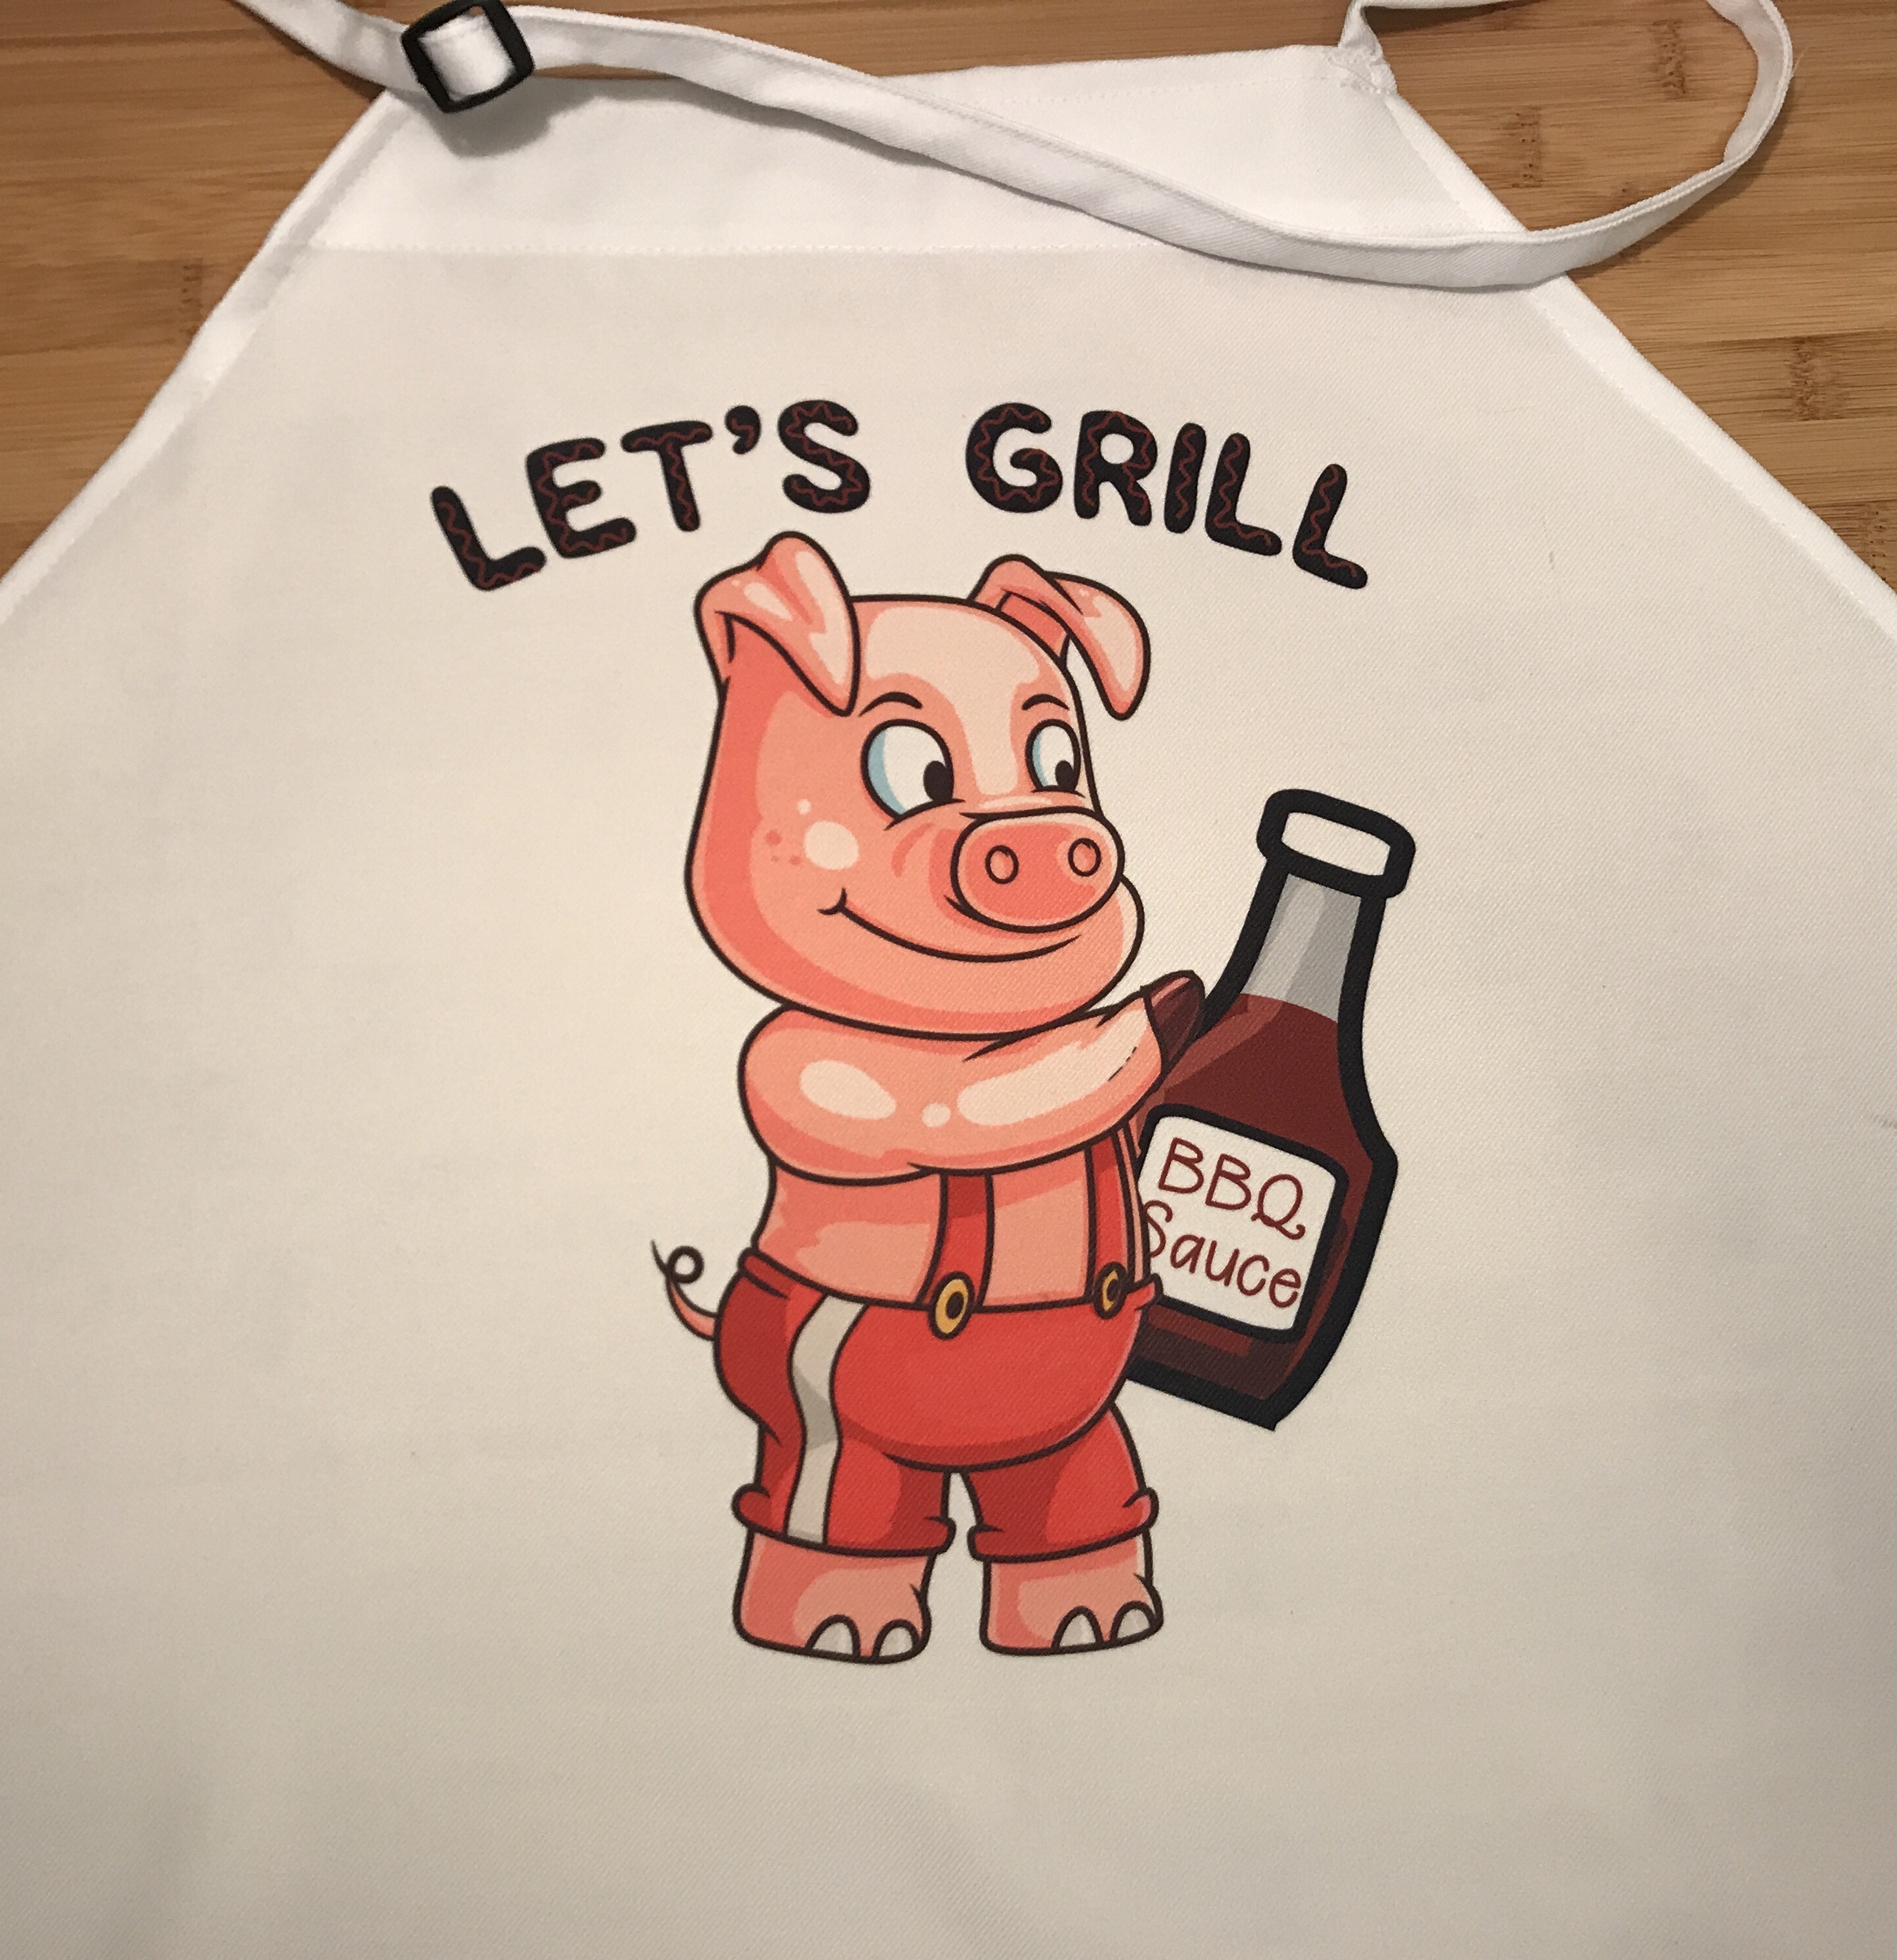 BBQ Apron made with sublimation printing